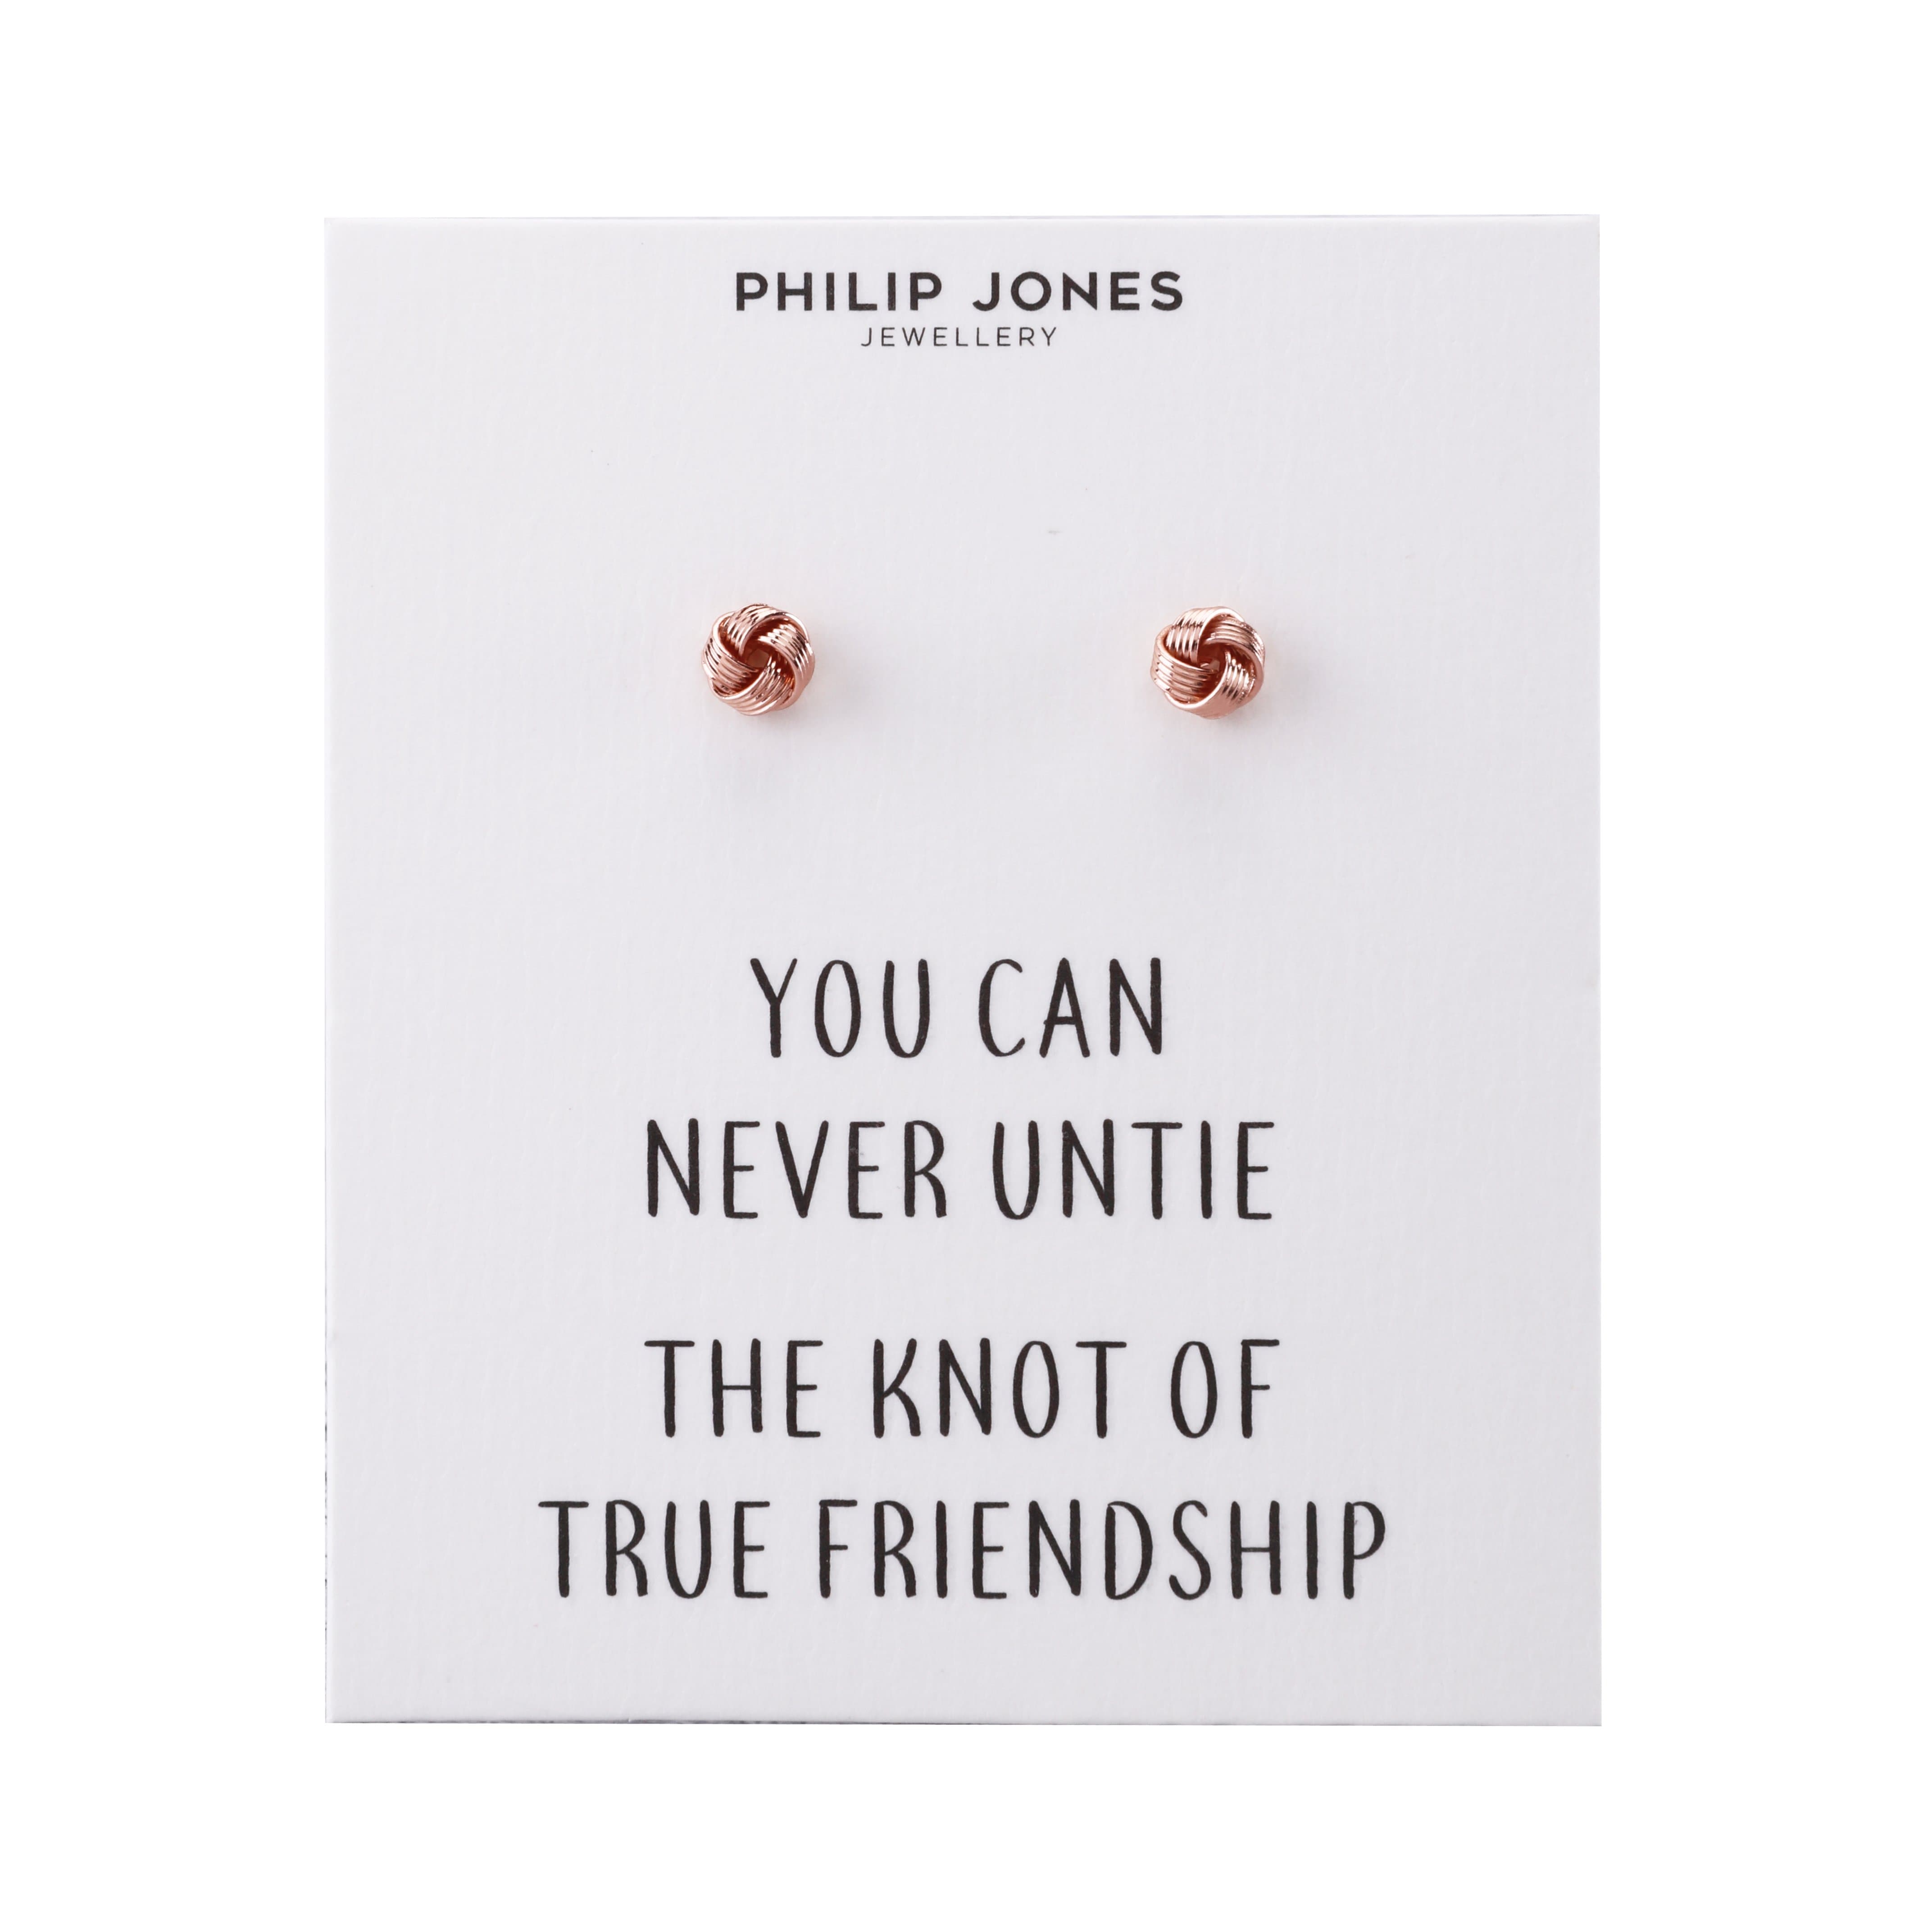 Rose Gold Plated Love Knot Earrings with Quote Card by Philip Jones Jewellery